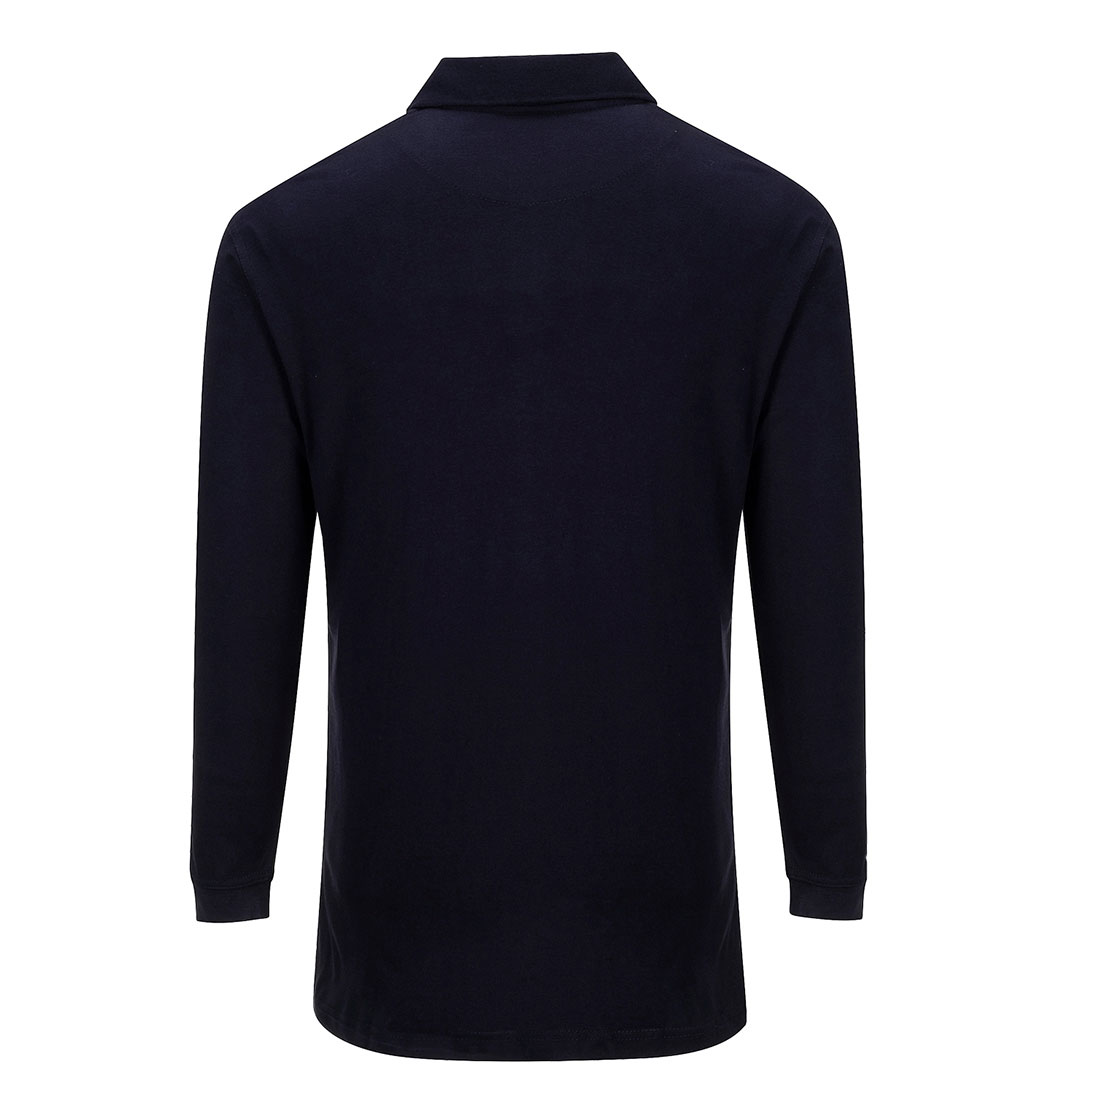 Flame Resistant Anti-Static Comfrtable Soft Long Sleeve Polo Shirt